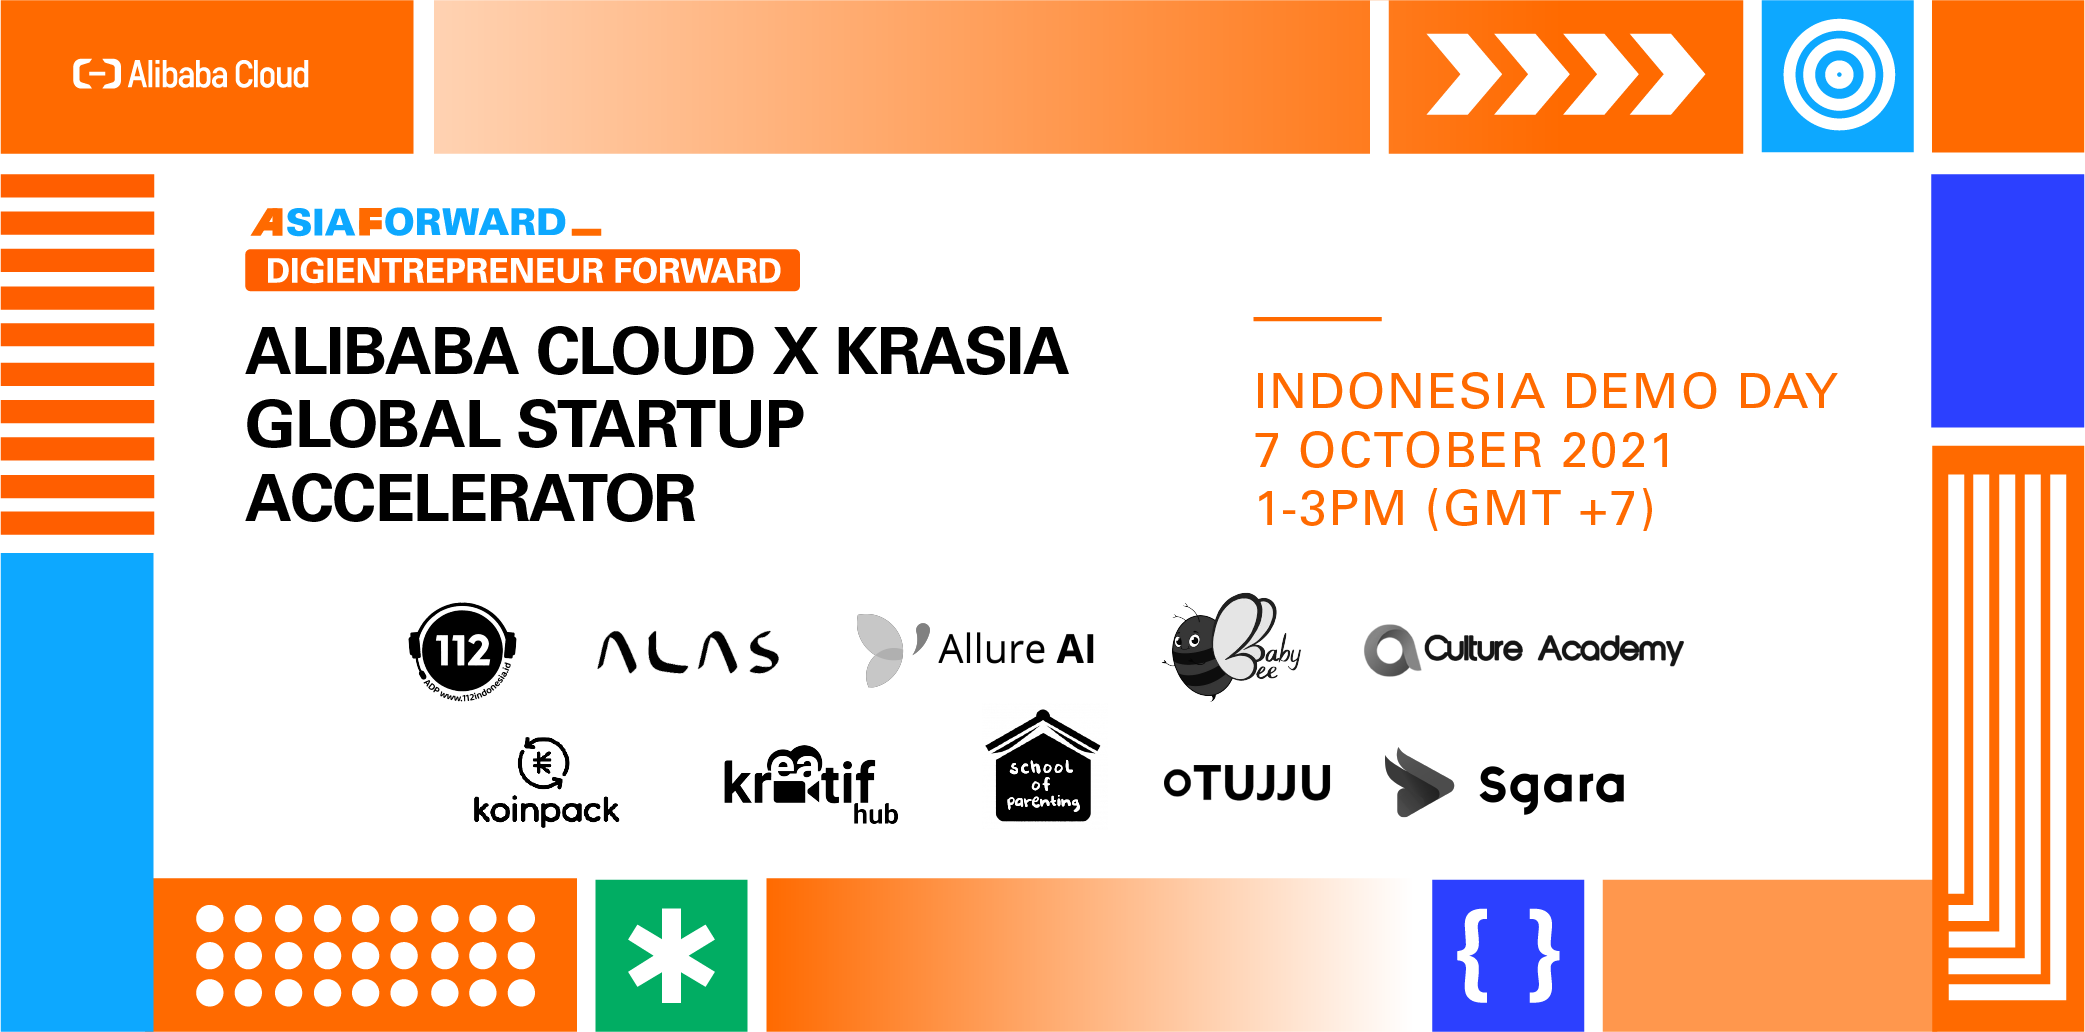 Alibaba Cloud x KrASIA Global Startup Accelerator announces finalists for Indonesia Demo Day